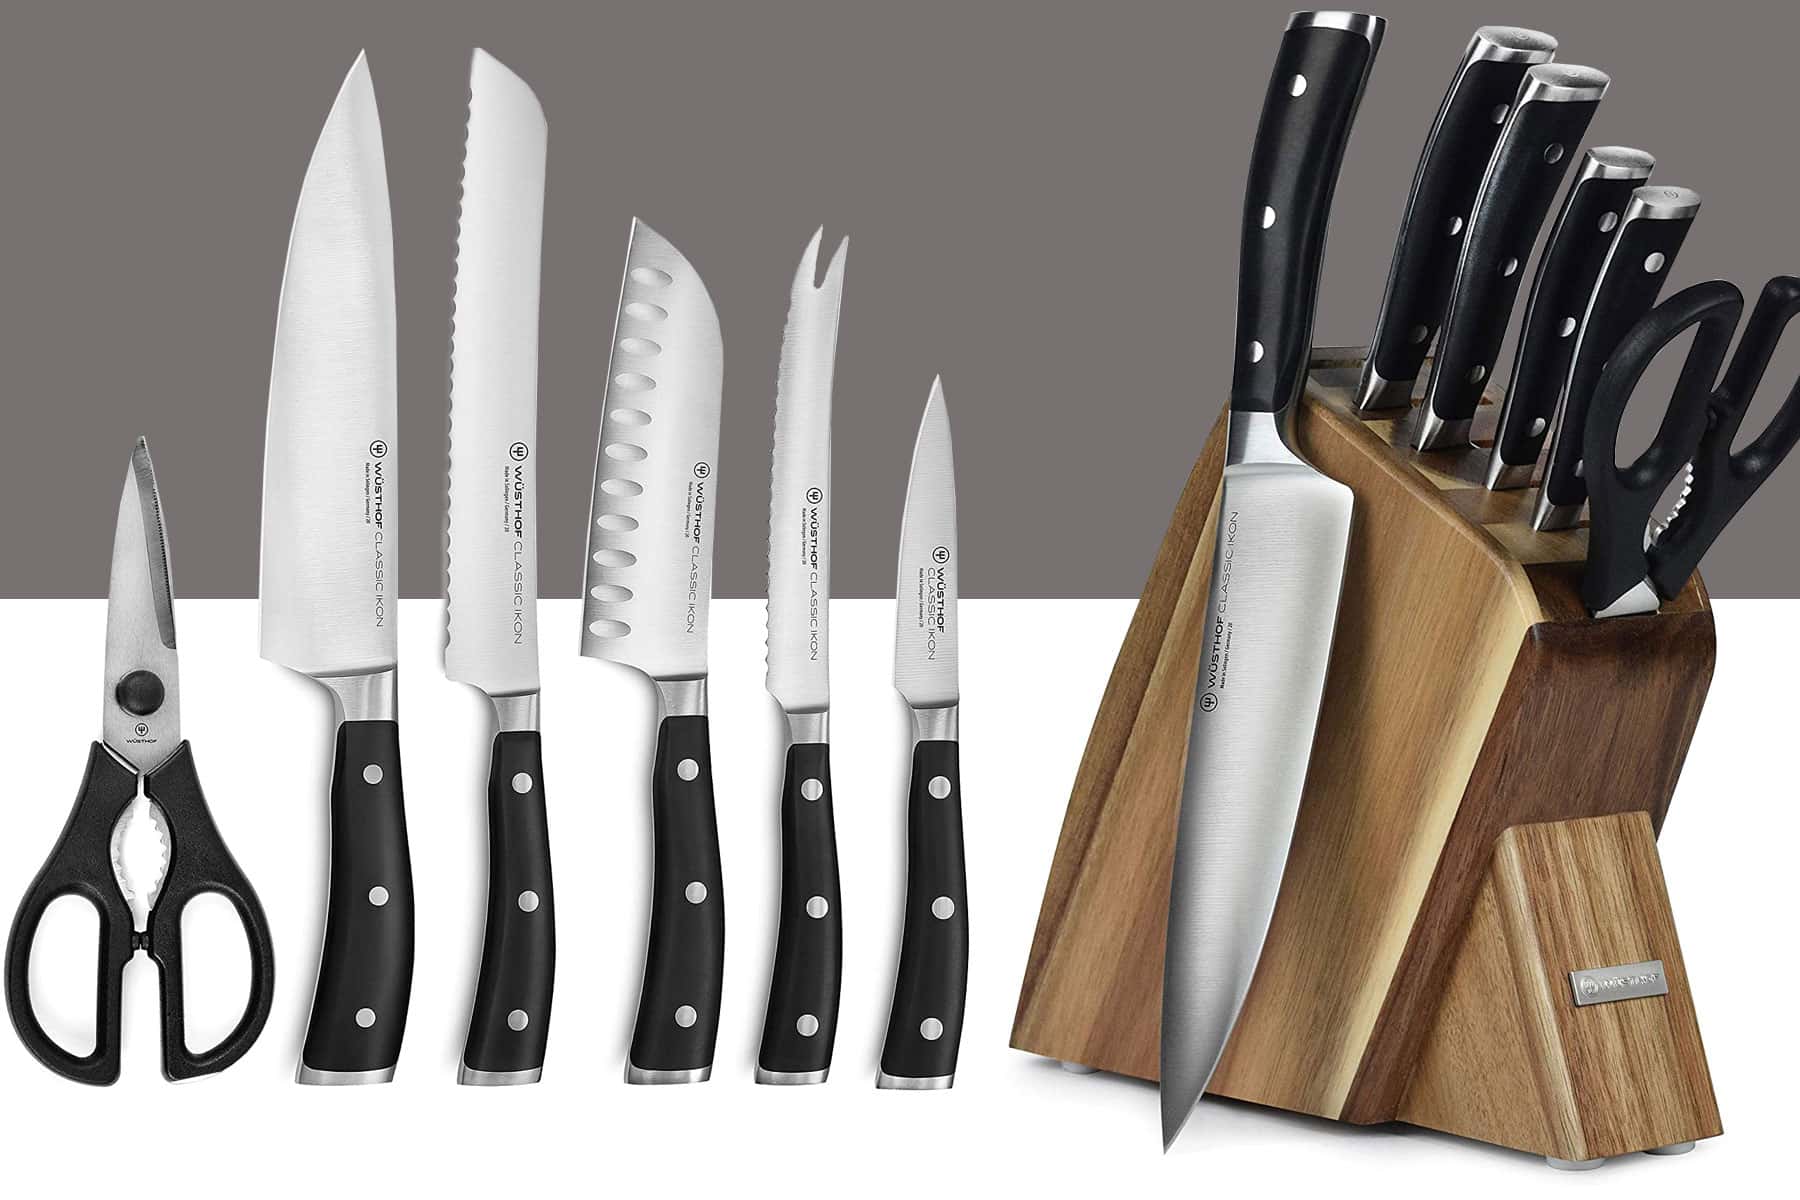 The Wusthof Classic Ikon seven-piece knife set wit the knives shown in and out of the storage block.